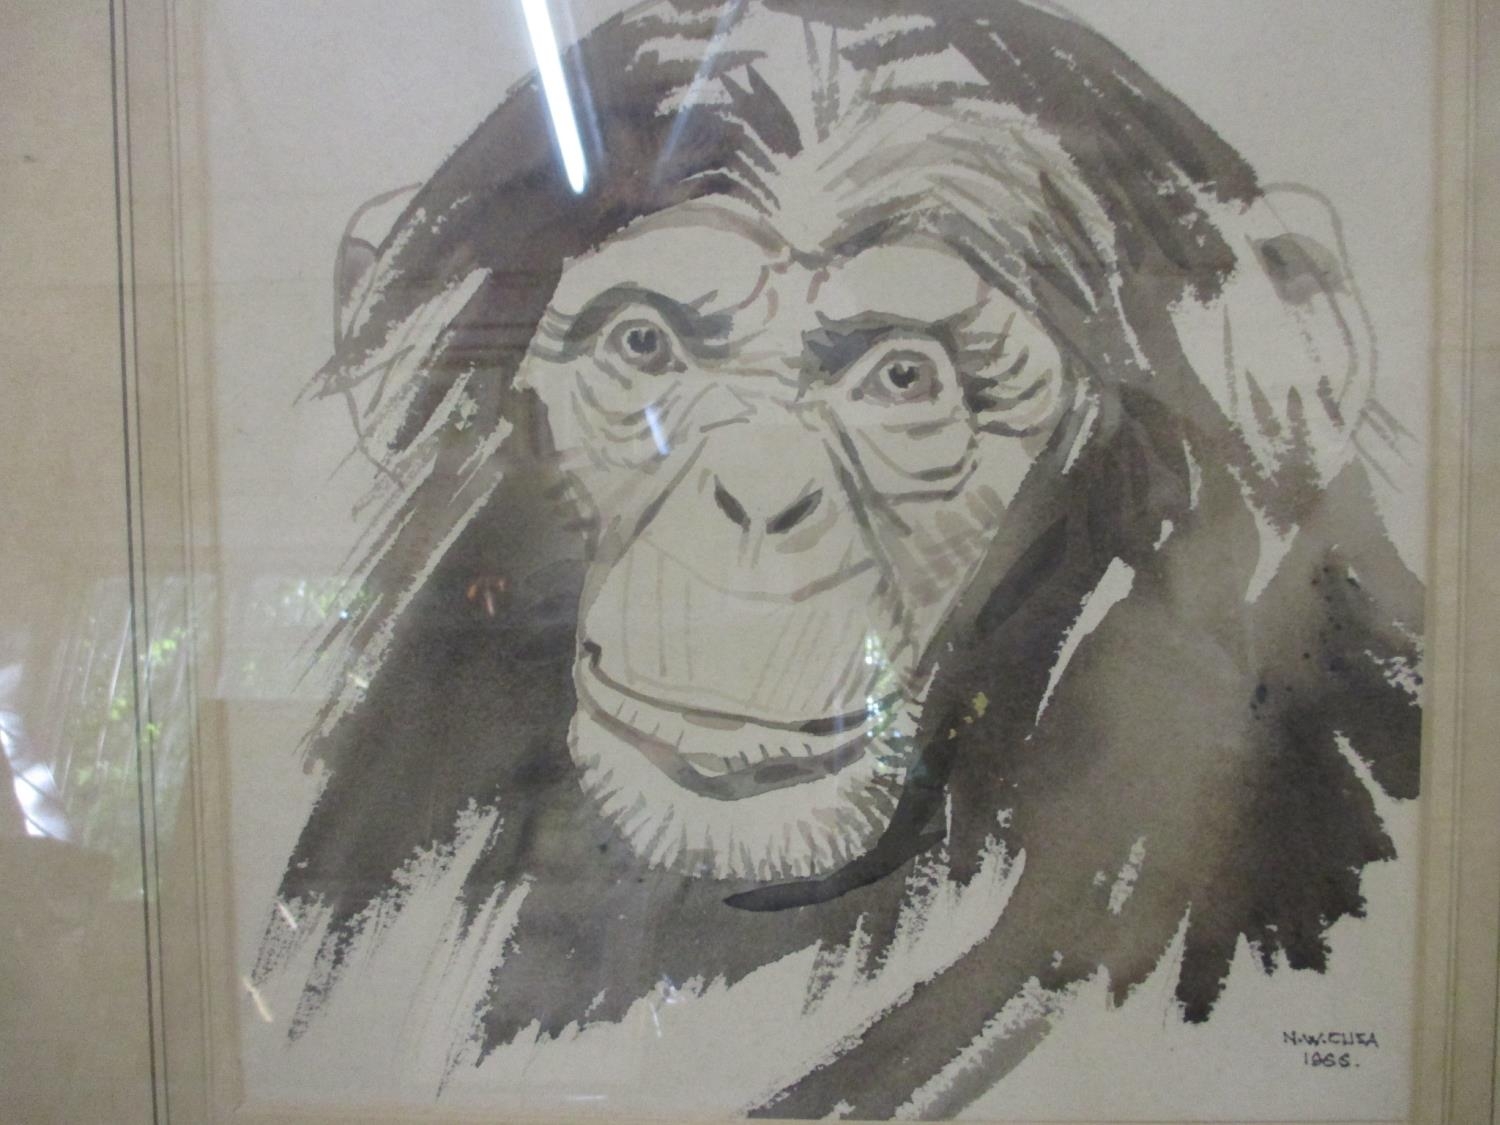 N U Cusa - a watercolour of a chimpanzee dated 1966 by the artist who was a member of the Society of - Image 5 of 5